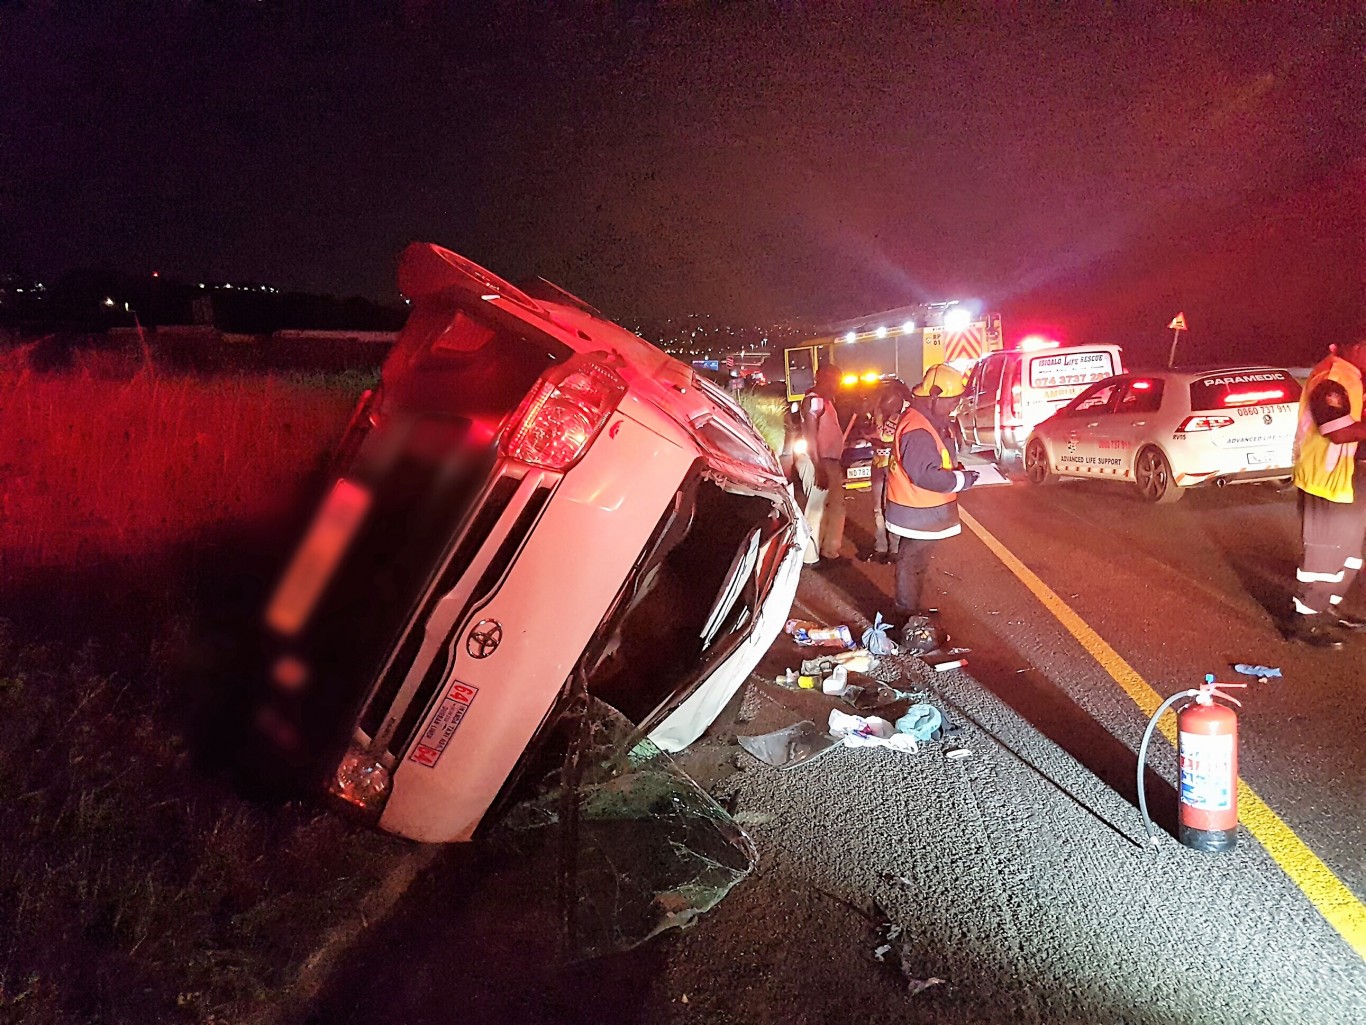 19 Injured in taxi crash on the N2 North bound near Clare Road bridge